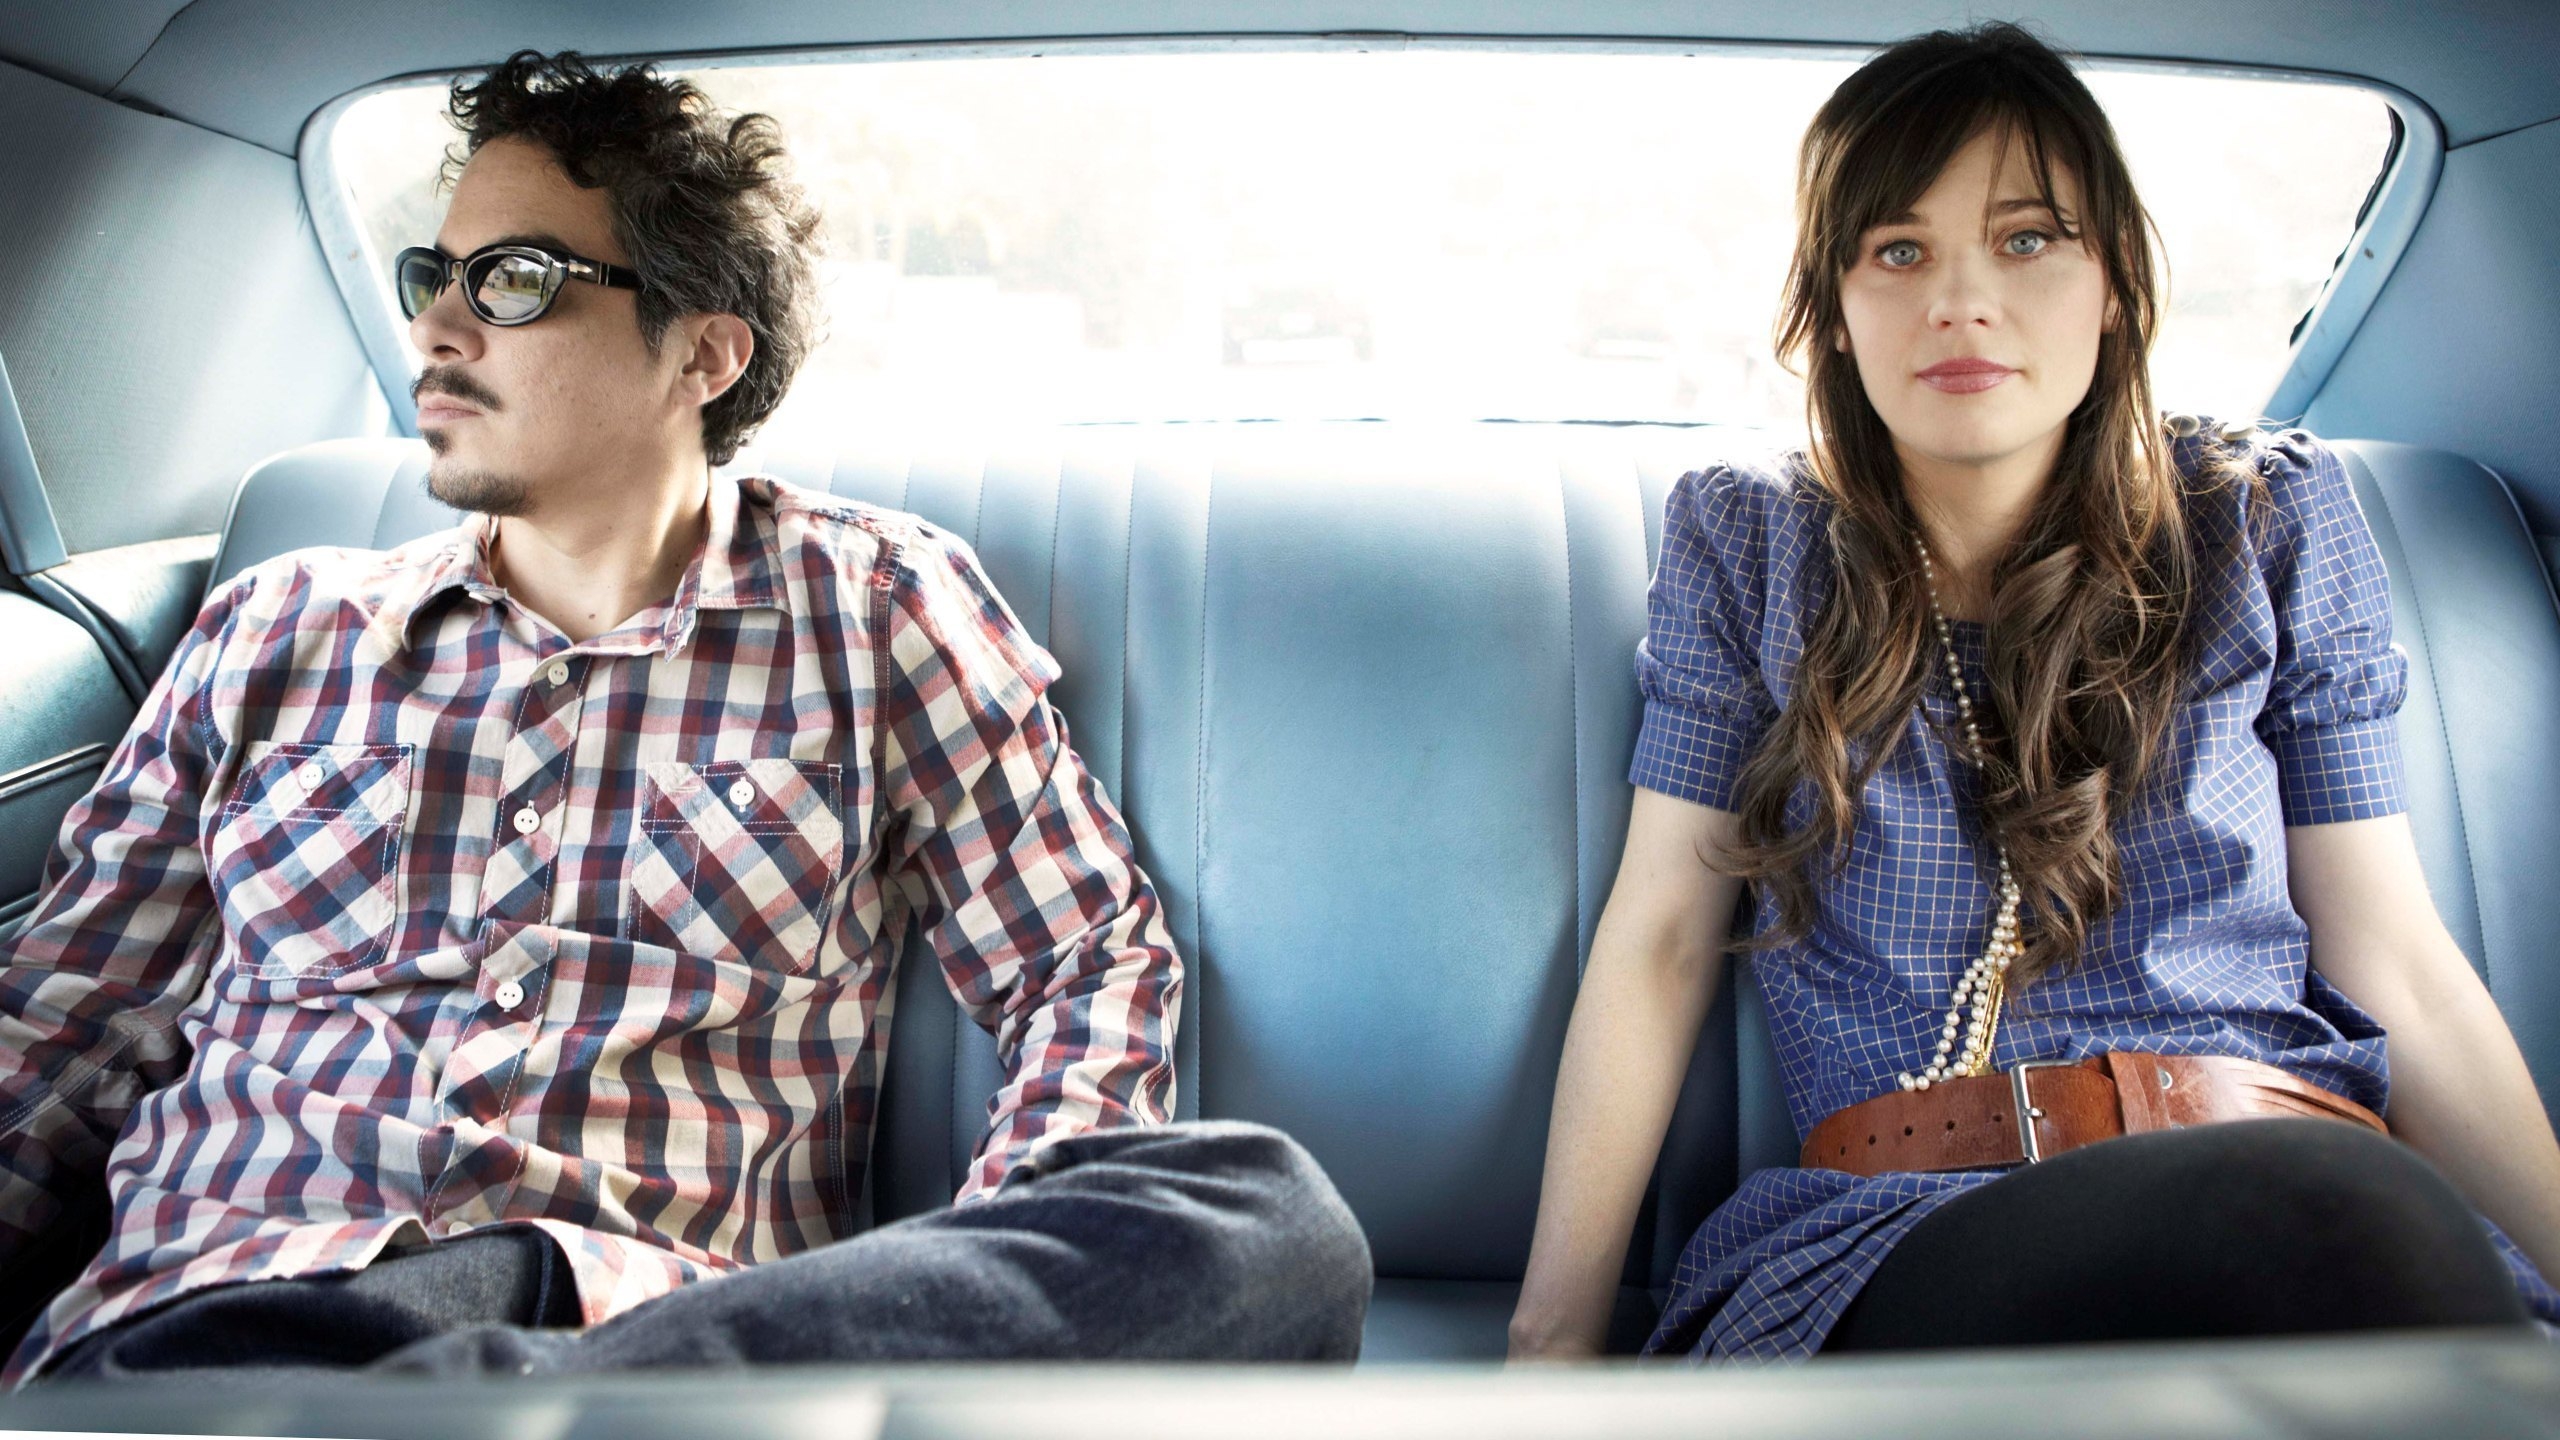 She and Him Band for 2560x1440 HDTV resolution